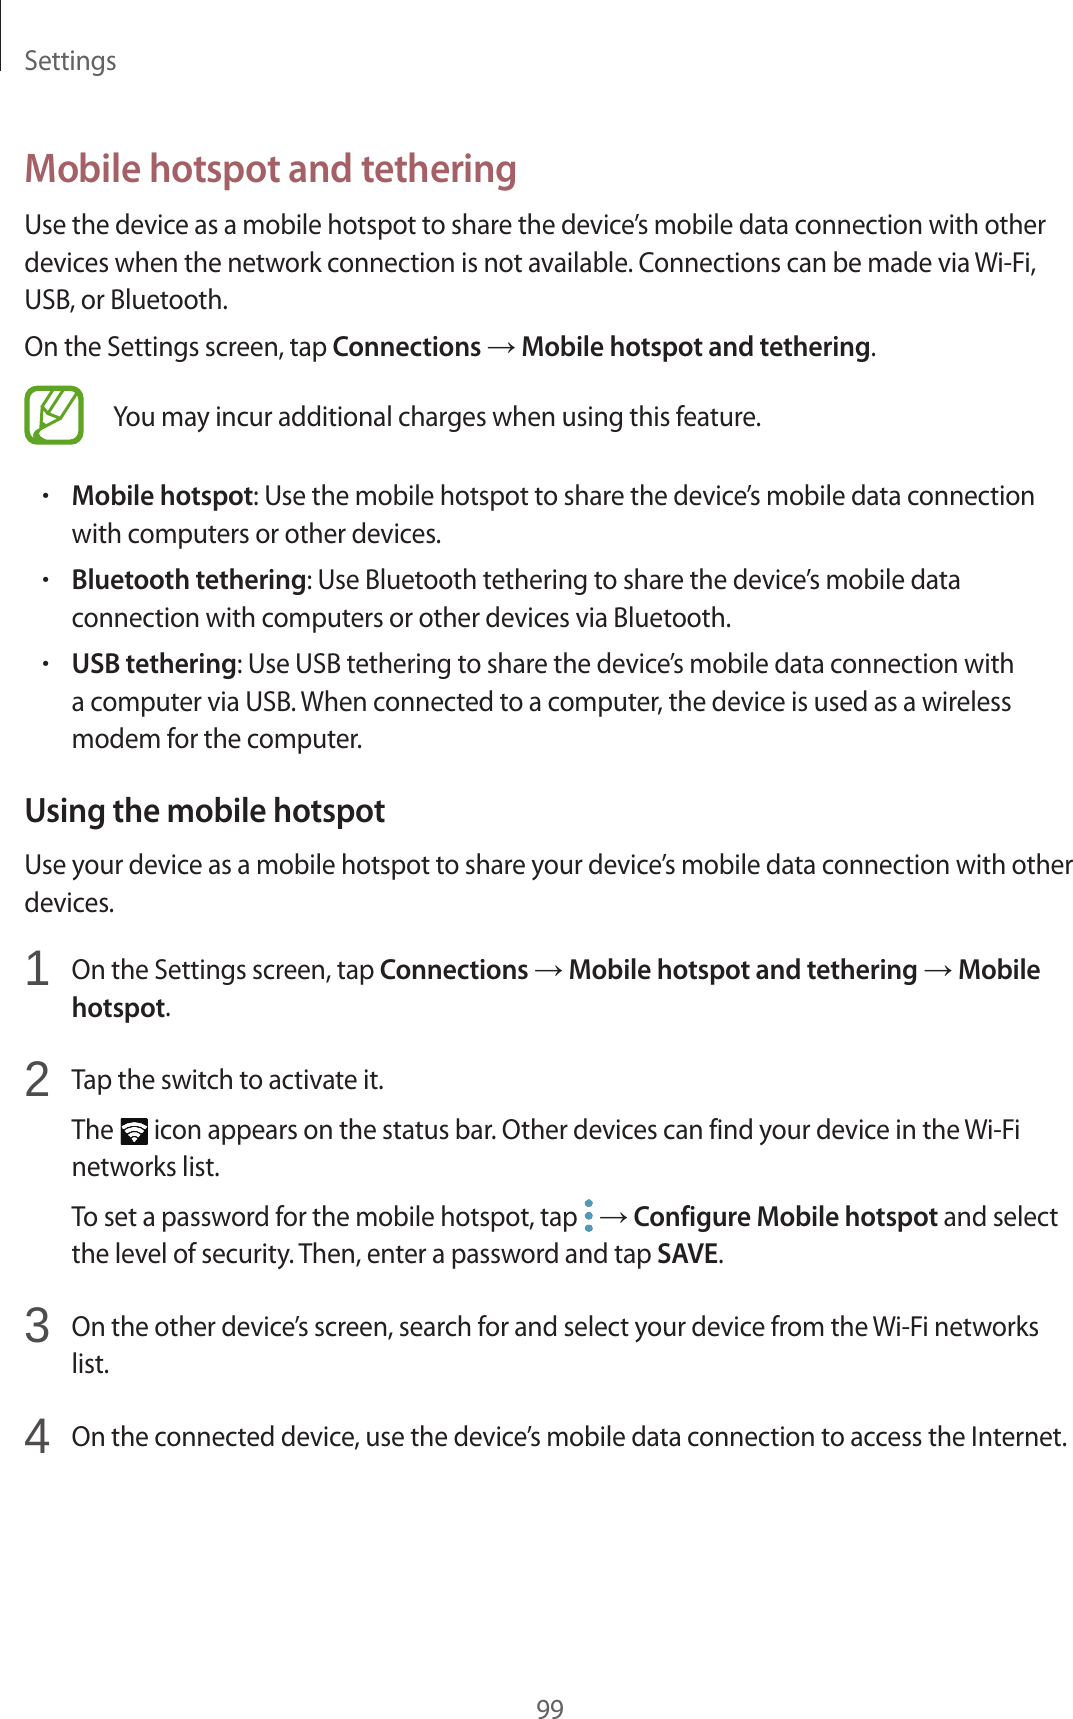 Settings99Mobile hotspot and tetheringUse the device as a mobile hotspot to share the device’s mobile data connection with other devices when the network connection is not available. Connections can be made via Wi-Fi, USB, or Bluetooth.On the Settings screen, tap Connections → Mobile hotspot and tethering.You may incur additional charges when using this feature.•Mobile hotspot: Use the mobile hotspot to share the device’s mobile data connection with computers or other devices.•Bluetooth tethering: Use Bluetooth tethering to share the device’s mobile data connection with computers or other devices via Bluetooth.•USB tethering: Use USB tethering to share the device’s mobile data connection with a computer via USB. When connected to a computer, the device is used as a wireless modem for the computer.Using the mobile hotspotUse your device as a mobile hotspot to share your device’s mobile data connection with other devices.1  On the Settings screen, tap Connections → Mobile hotspot and tethering → Mobile hotspot.2  Tap the switch to activate it.The   icon appears on the status bar. Other devices can find your device in the Wi-Fi networks list.To set a password for the mobile hotspot, tap   → Configure Mobile hotspot and select the level of security. Then, enter a password and tap SAVE.3  On the other device’s screen, search for and select your device from the Wi-Fi networks list.4  On the connected device, use the device’s mobile data connection to access the Internet.